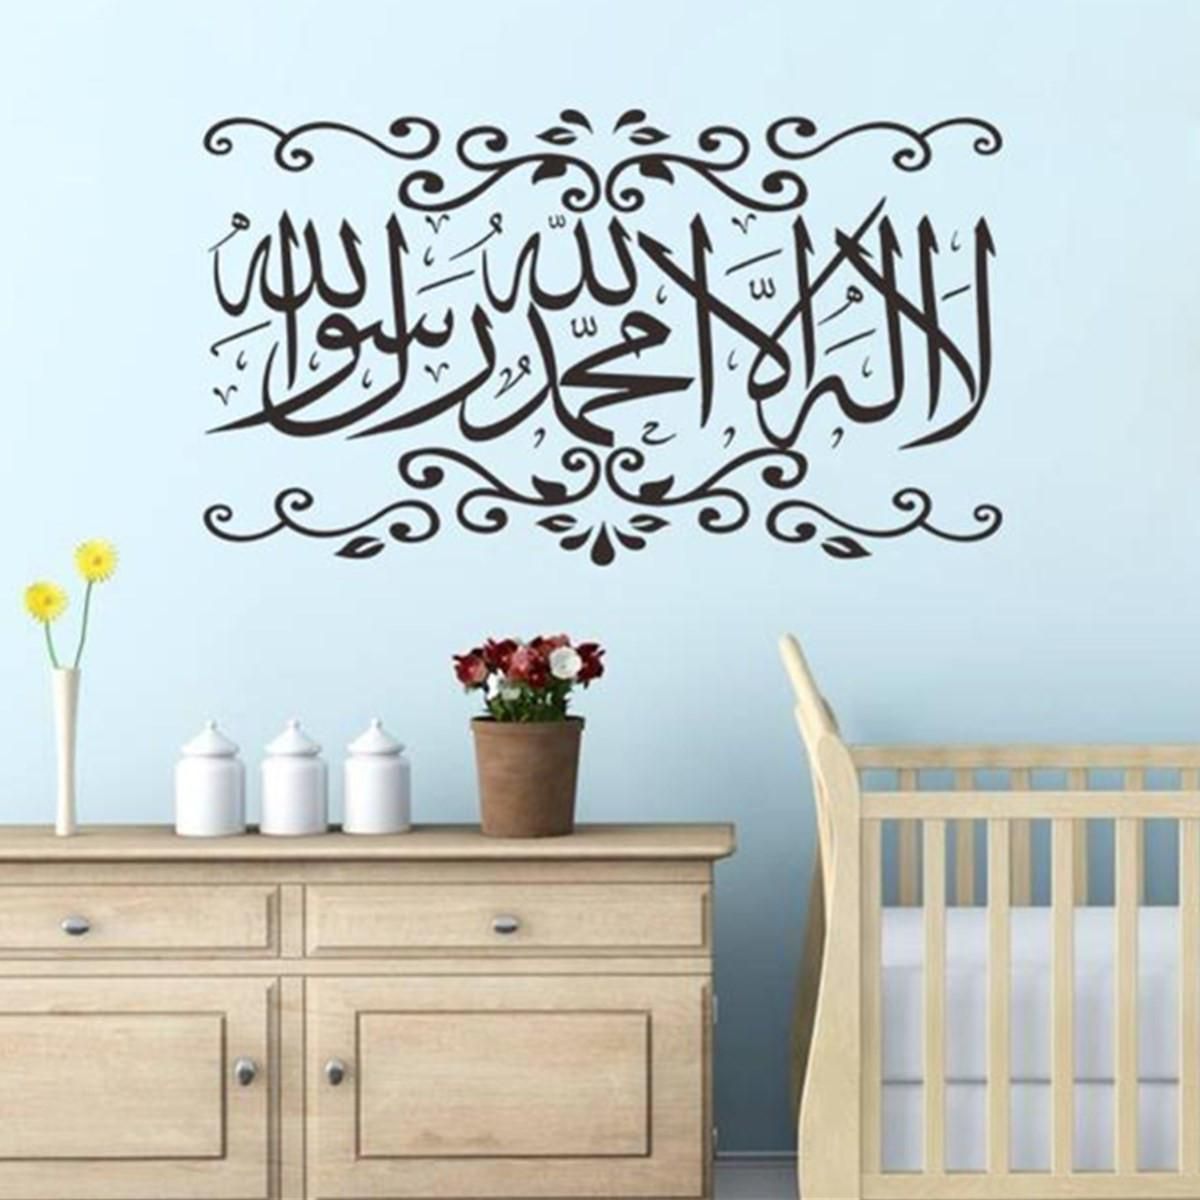 Arabic Calligraphy Bismillah Muslim Islamic Art Wall Decor Vinyl Decal Sticker Buy Arabic Calligraphy Bismillah Muslim Islamic Art Wall Decor Vinyl Decal Sticker Online At Low Price Snapdeal